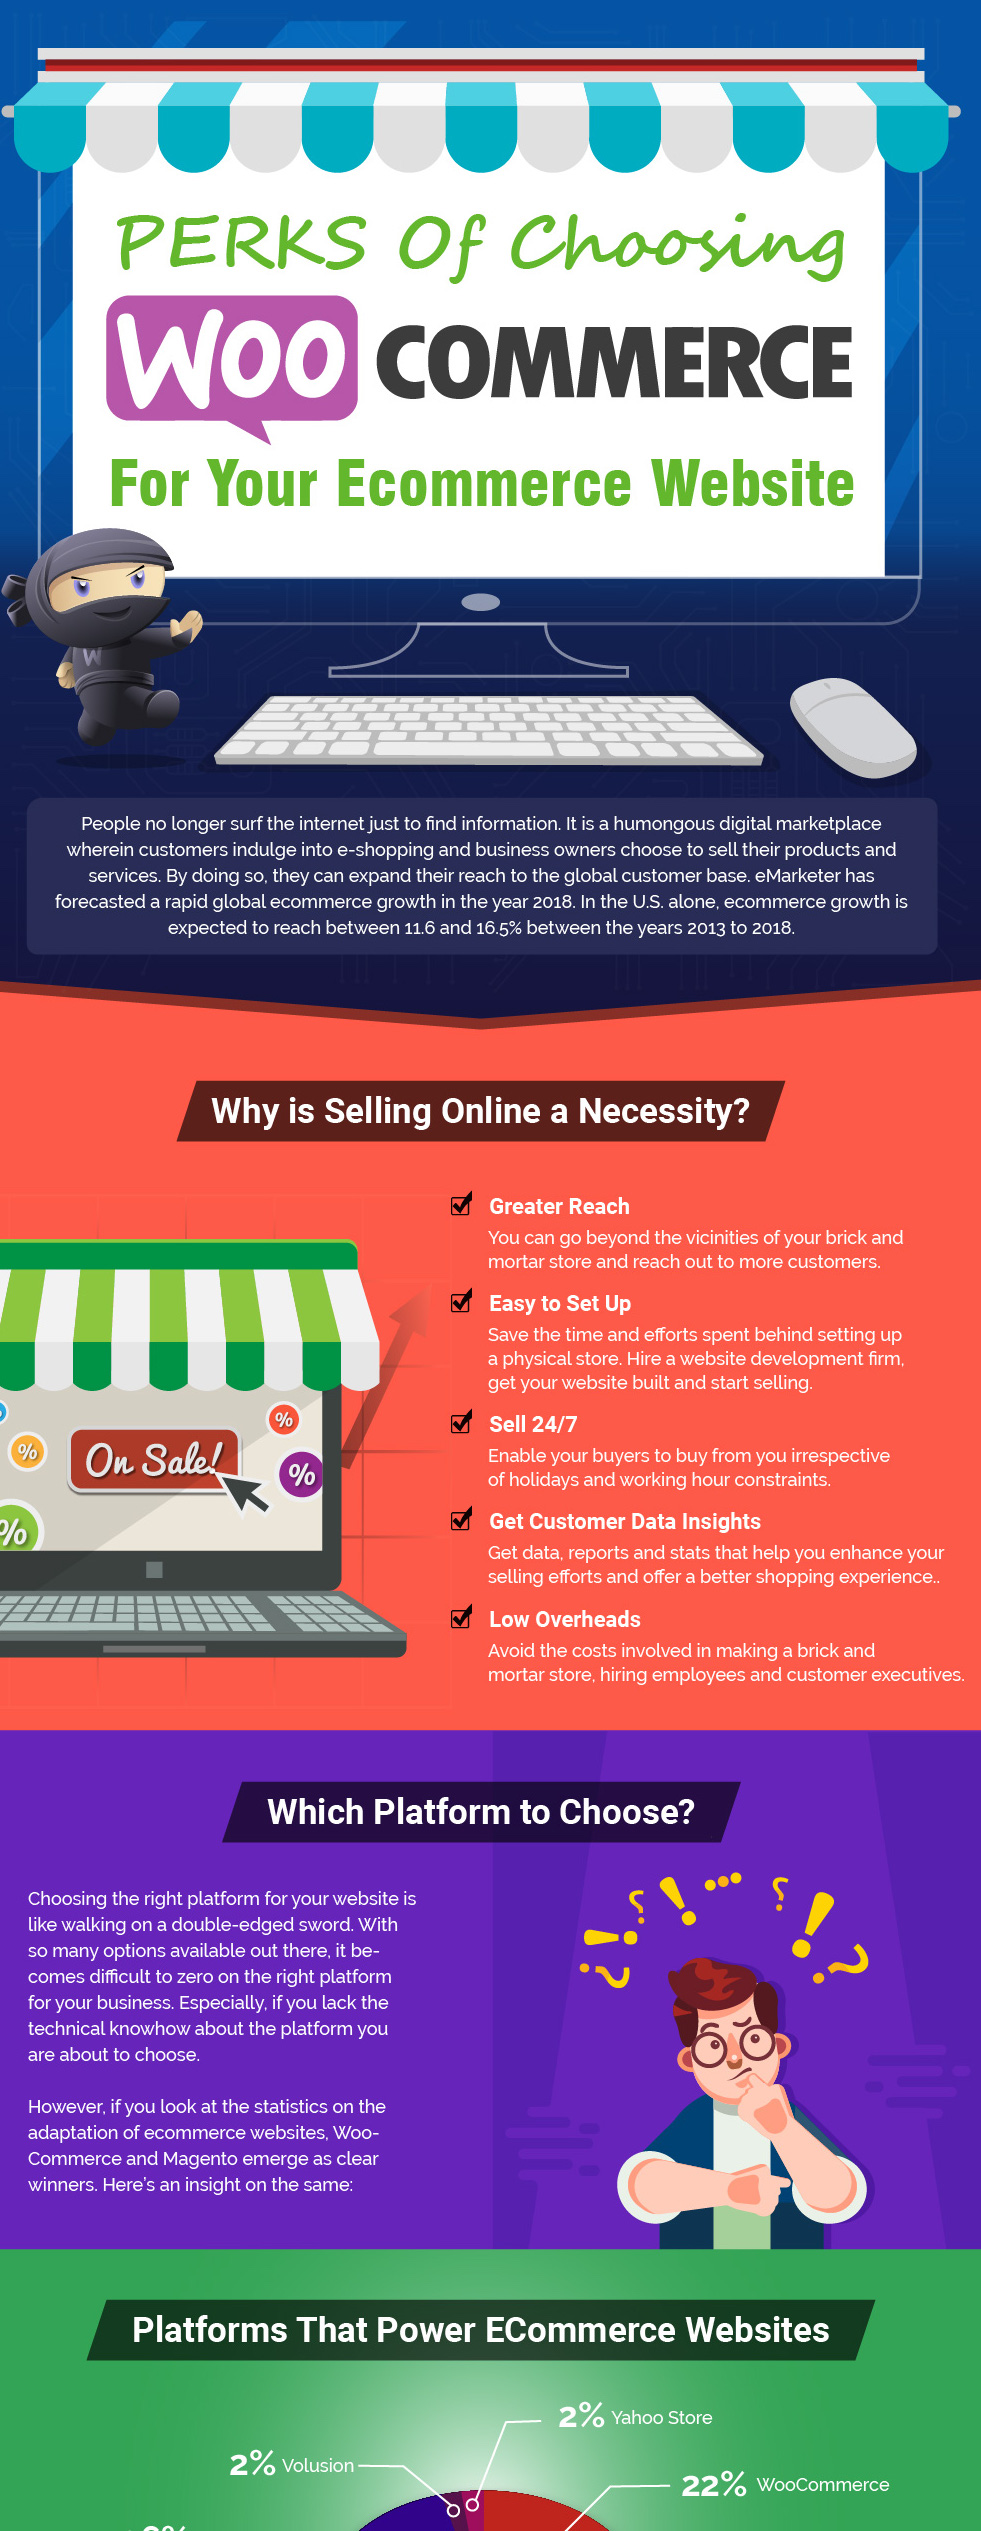 If you are a business owner wanting to establish your business, WooCommerce is your way to go. Go through this Infographic by Biztech to know what makes WooCommerce a winner amongst other eCommerce platforms.